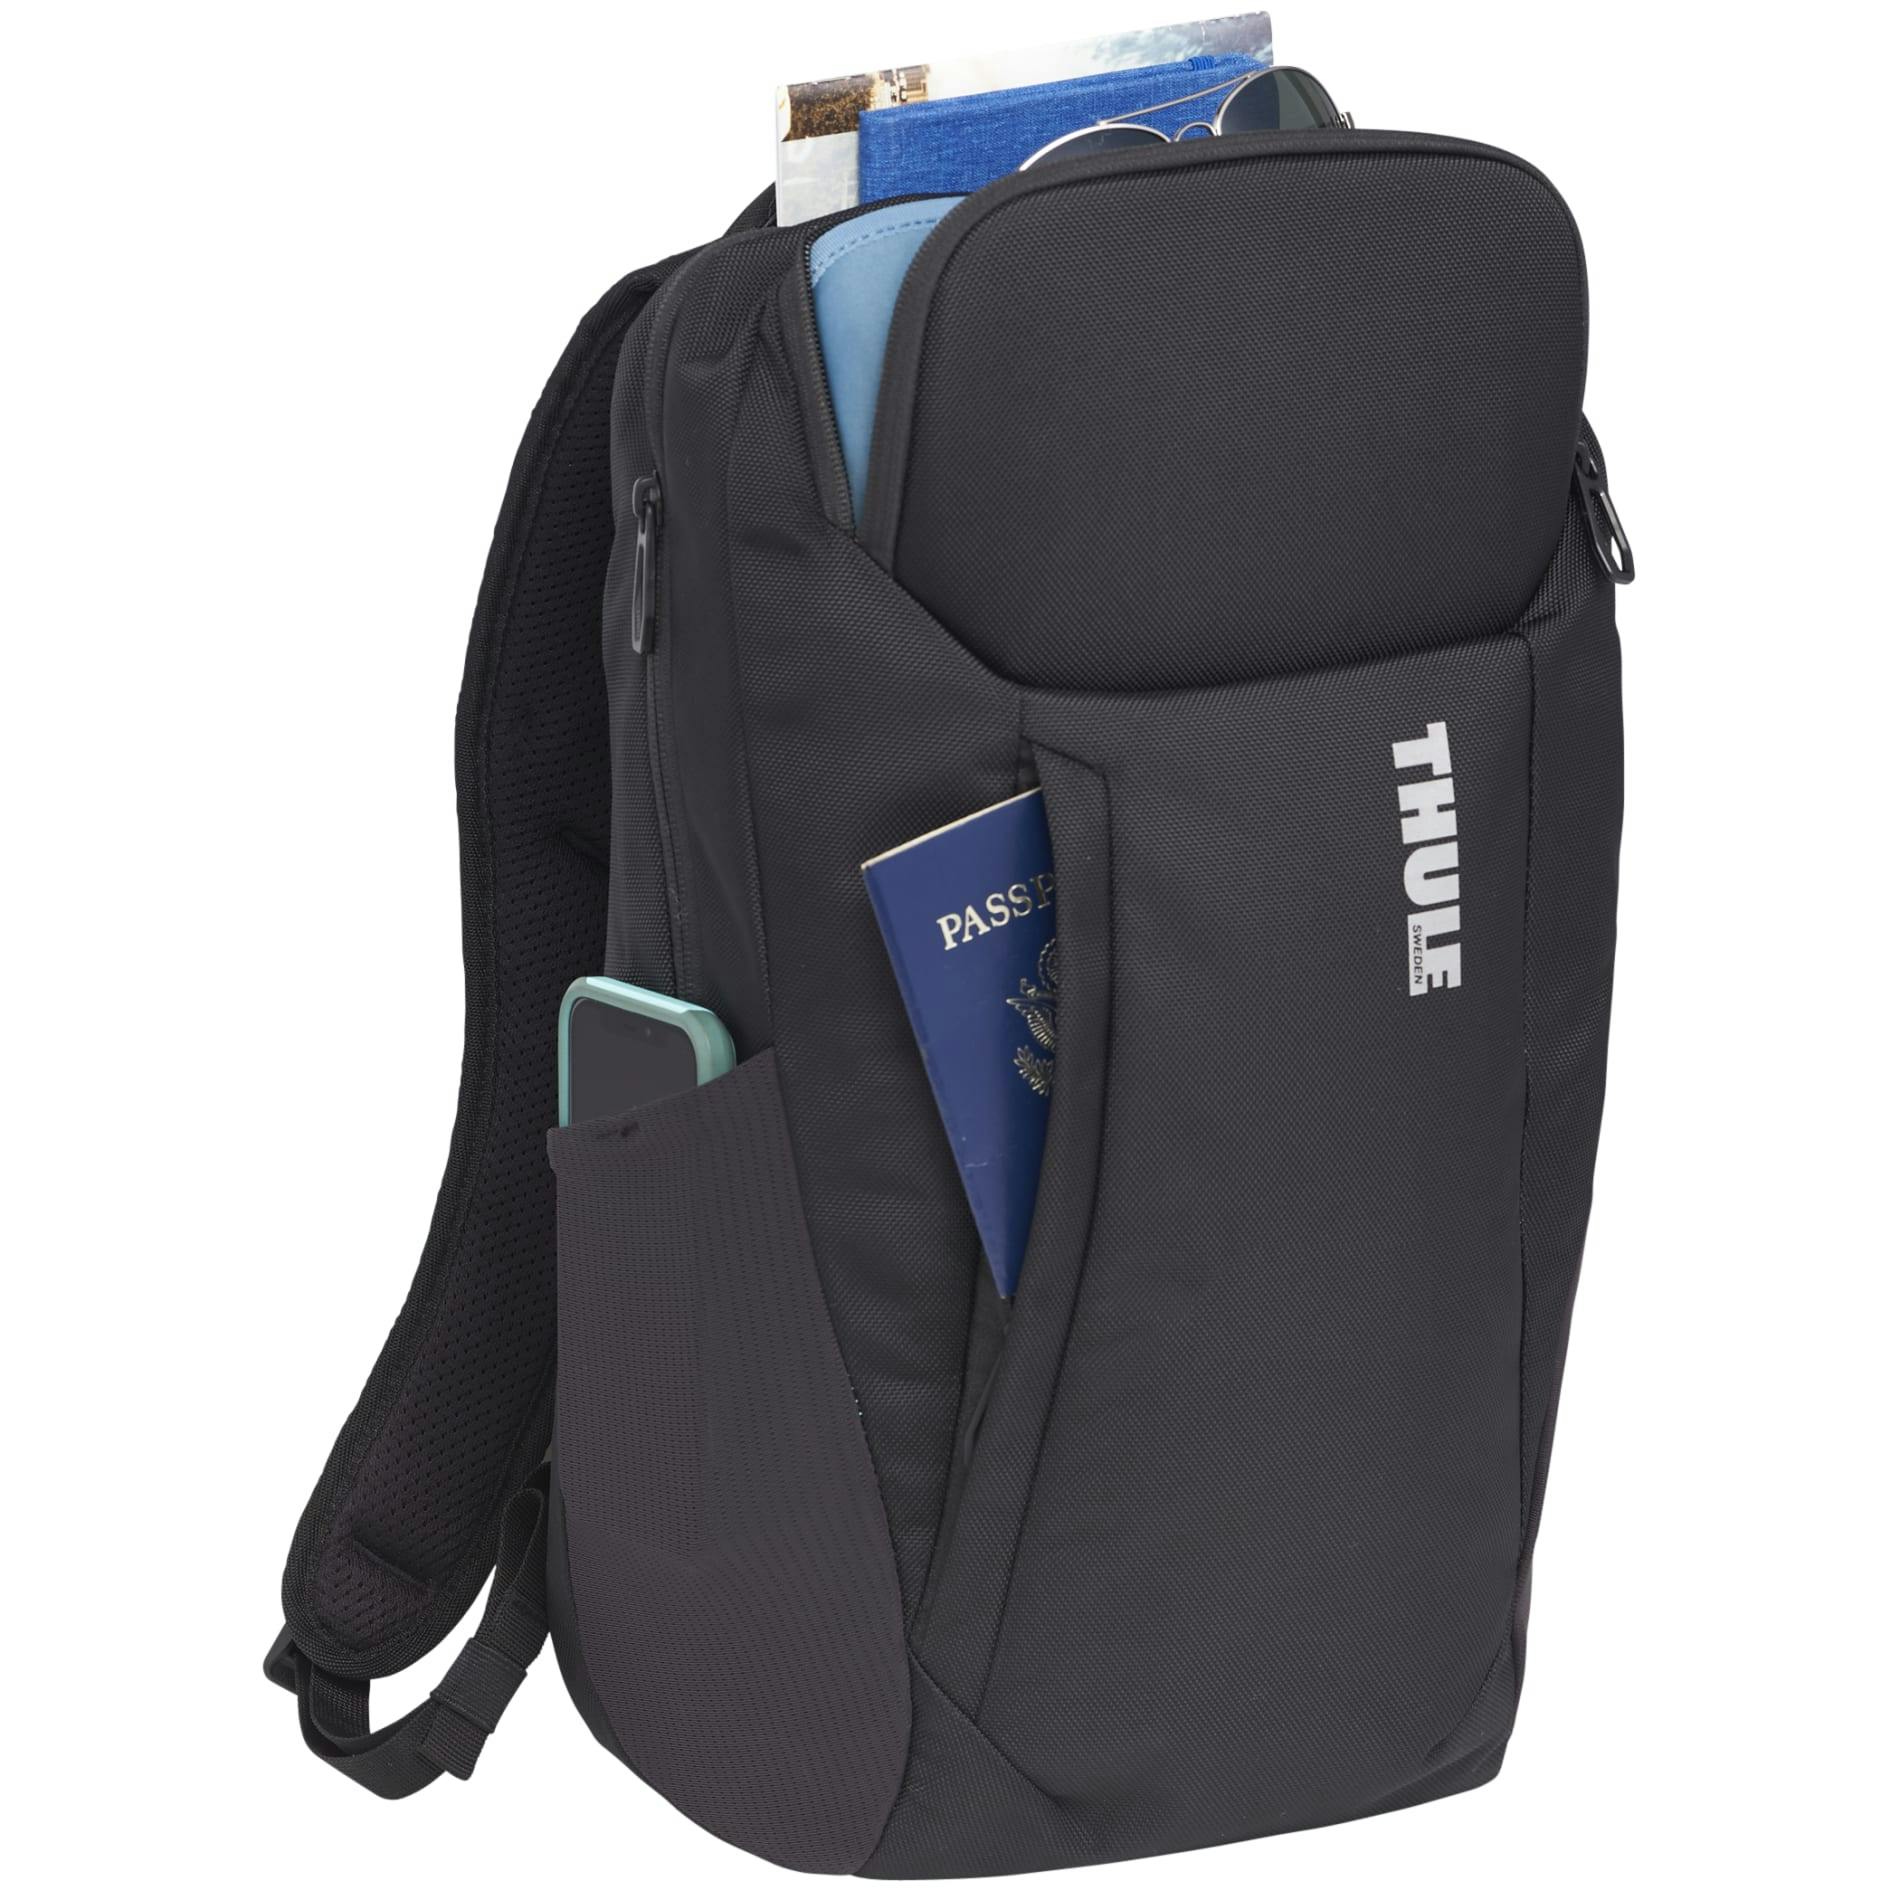 Thule Accent 15" Computer Backpack 20L - additional Image 3